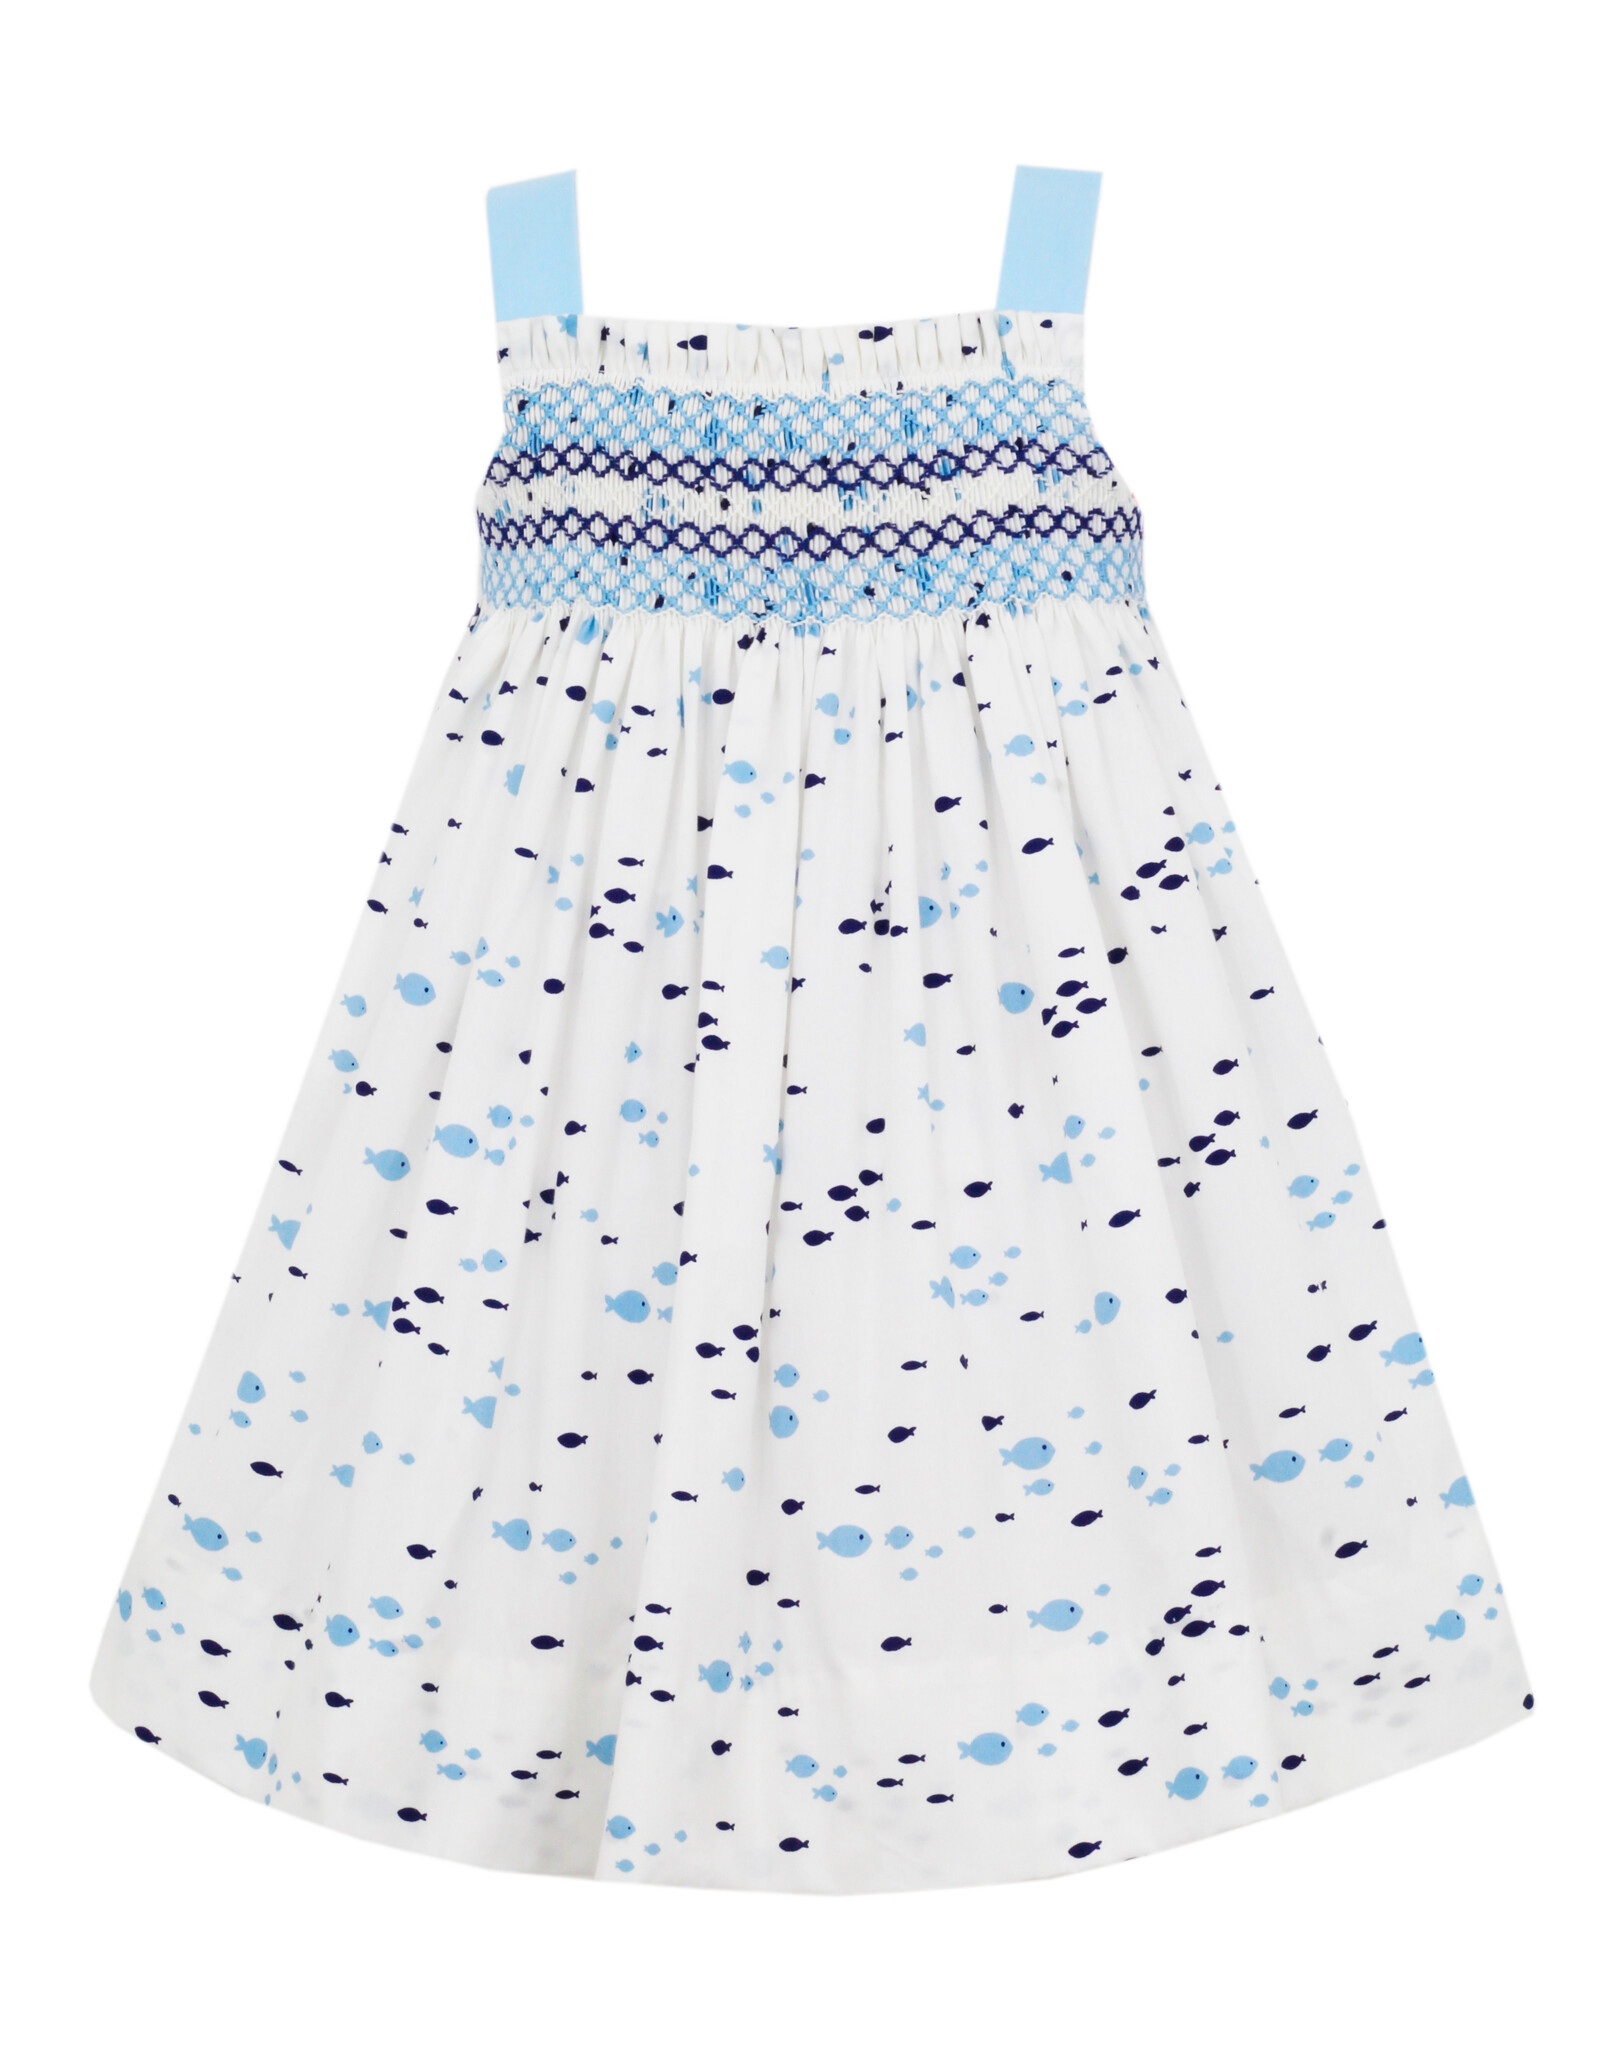 Claire and Charlie Fish Print Sundress w/ Solid Blue Straps